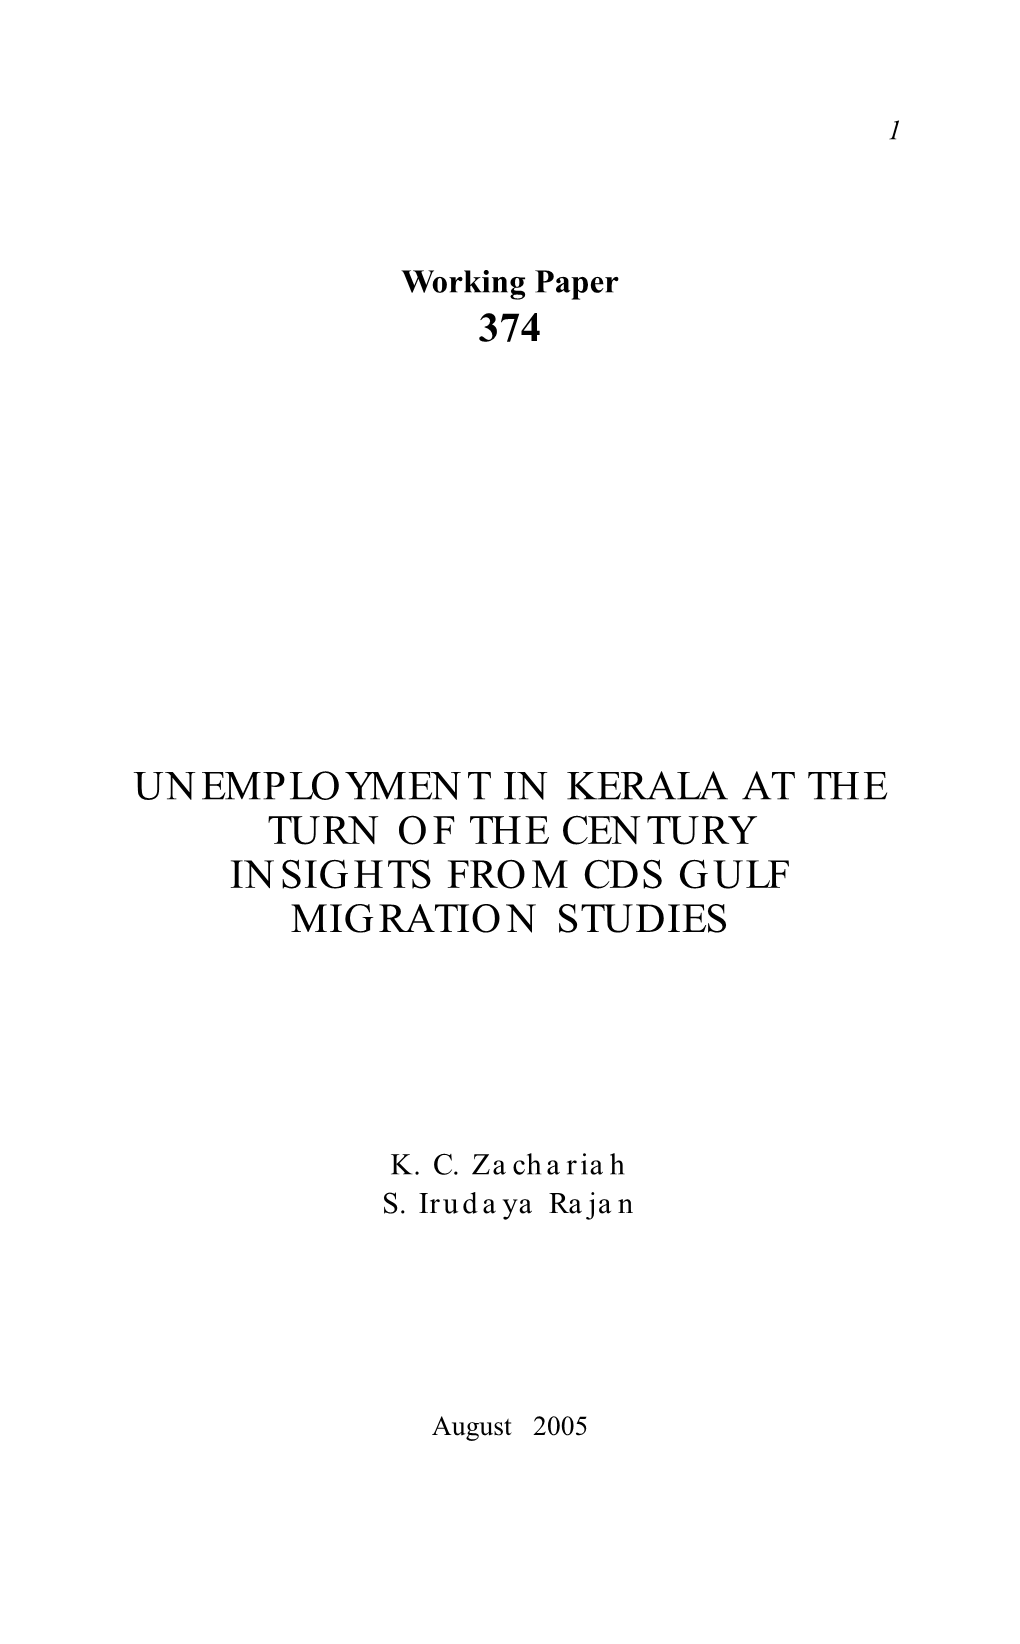 Unemployment in Kerala at the Turn of the Century Insights from Cds Gulf Migration Studies